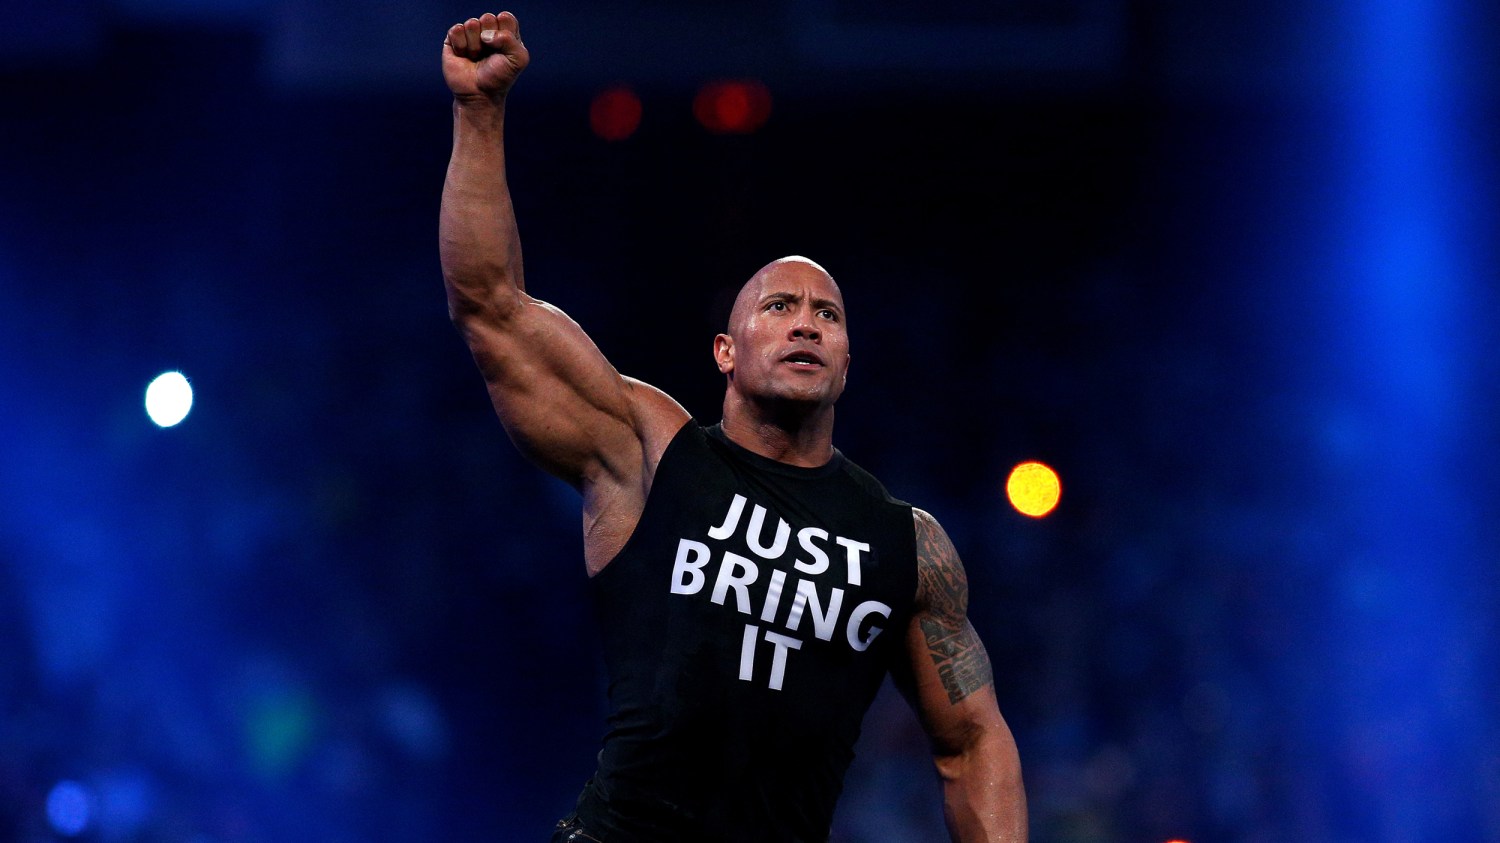 Fate of the Furious' Dwayne Johnson has been wrestling for years with the  politics of race, pro wrestling and Hollywood